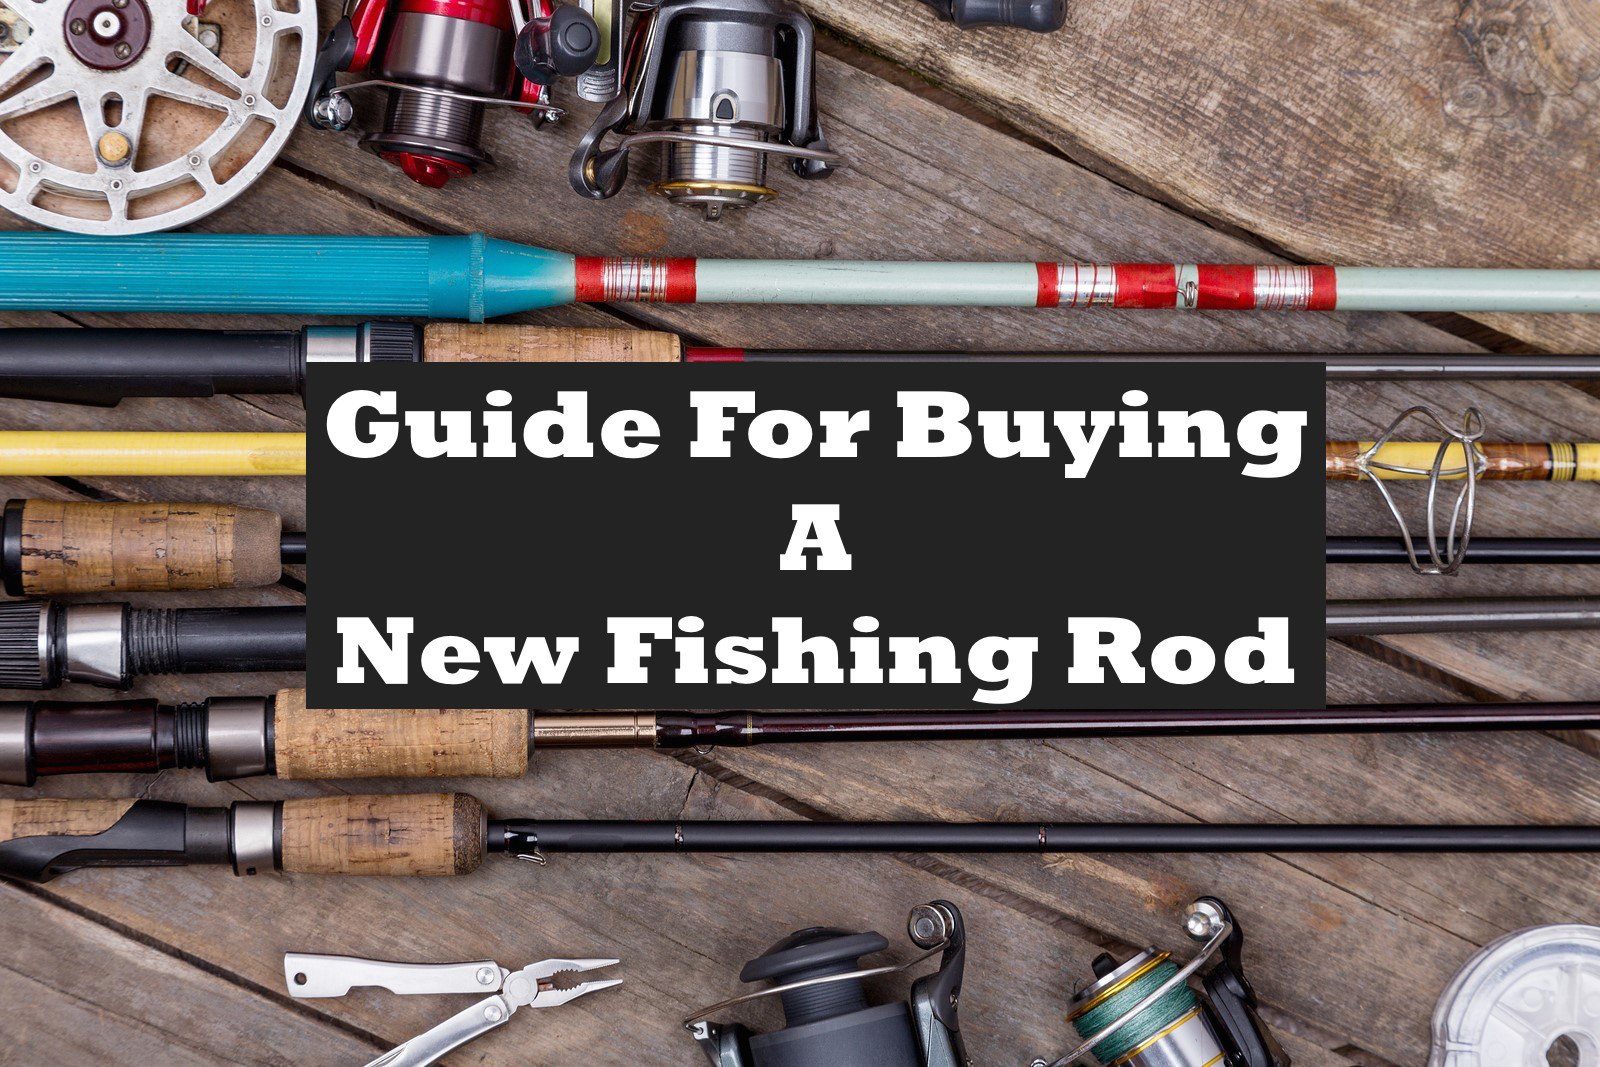 Guide for buying a new fishing rod